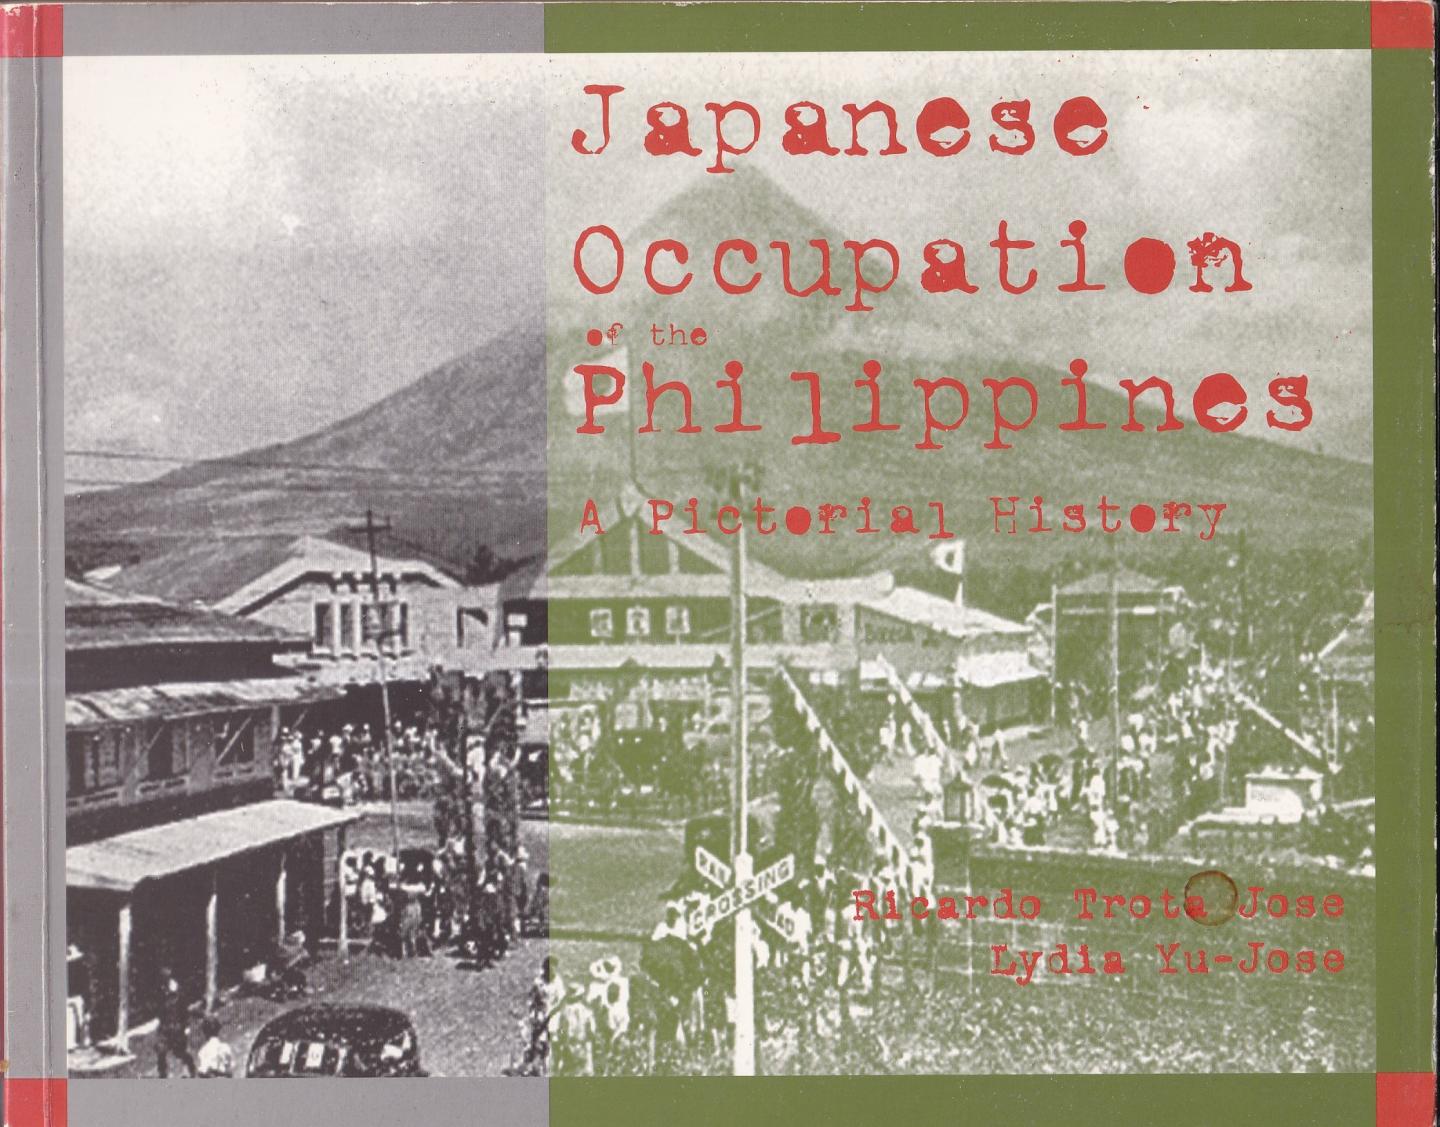 Trota Jose, Ricardo & Yu-Jose, Lydia N. - The Japanese occupation of the Philippines: a pictorial history